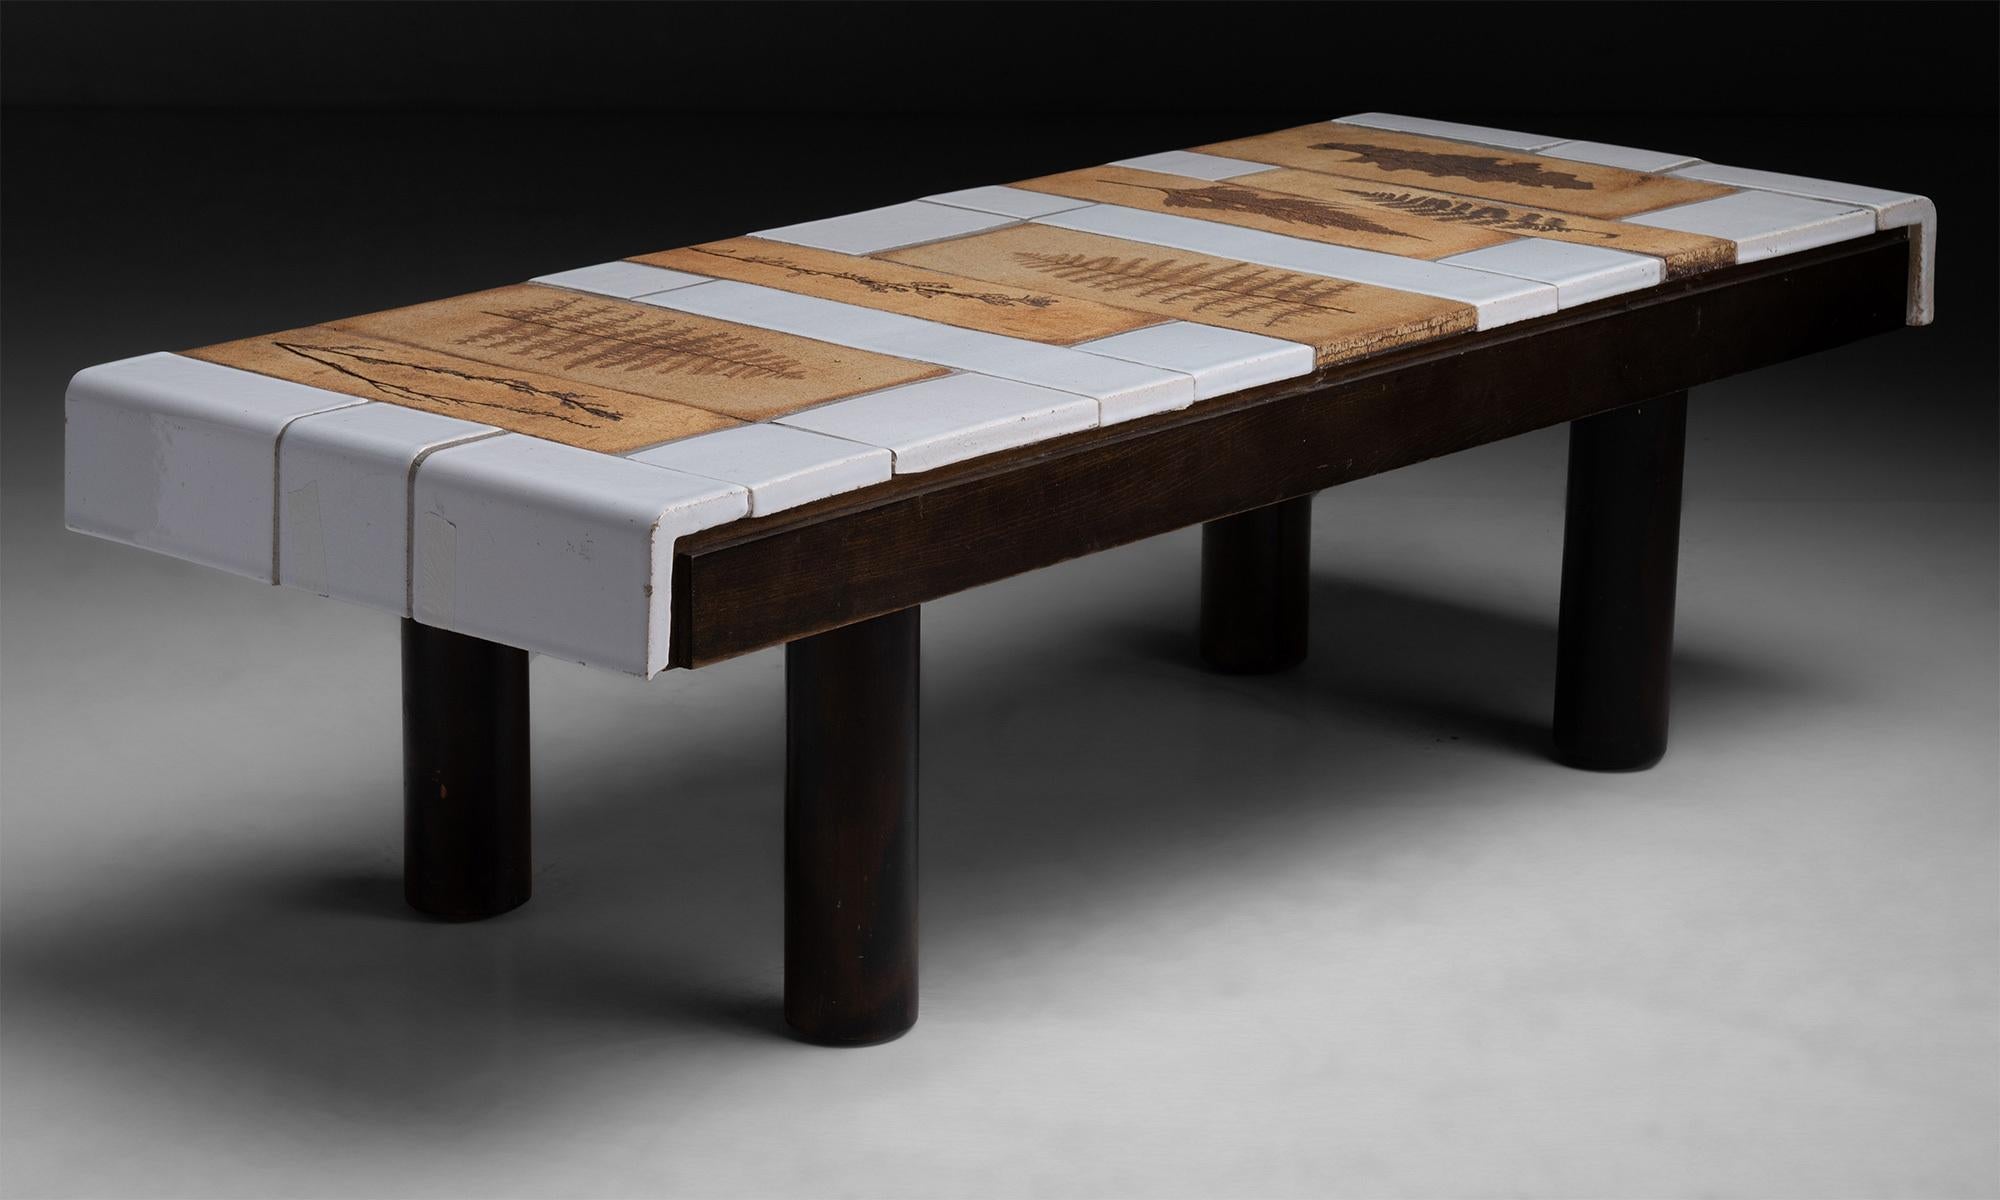 Carved Ceramic Tile Coffee Table by Roger Capron, France, circa 1970